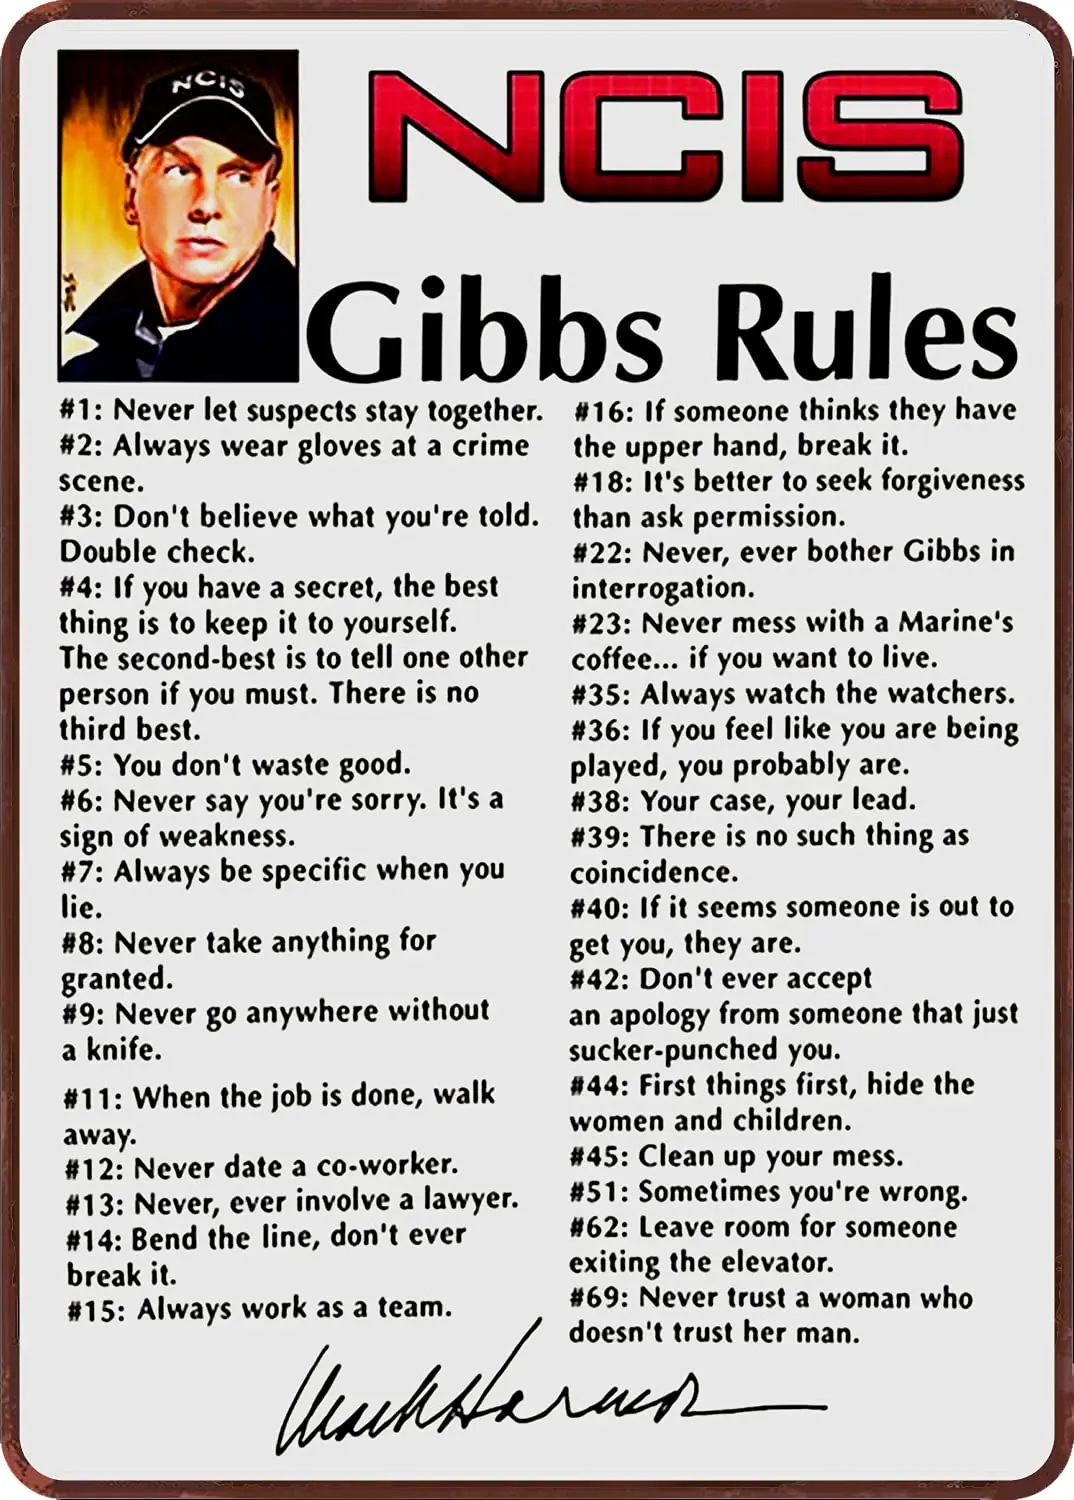 

NCIS Gibbs Rules Leroy Jethro Gibbs Signature Funny 69 Rules Tin Metal Sign for Man Cave Shop Bar Pub Wall Decor 8x12 In